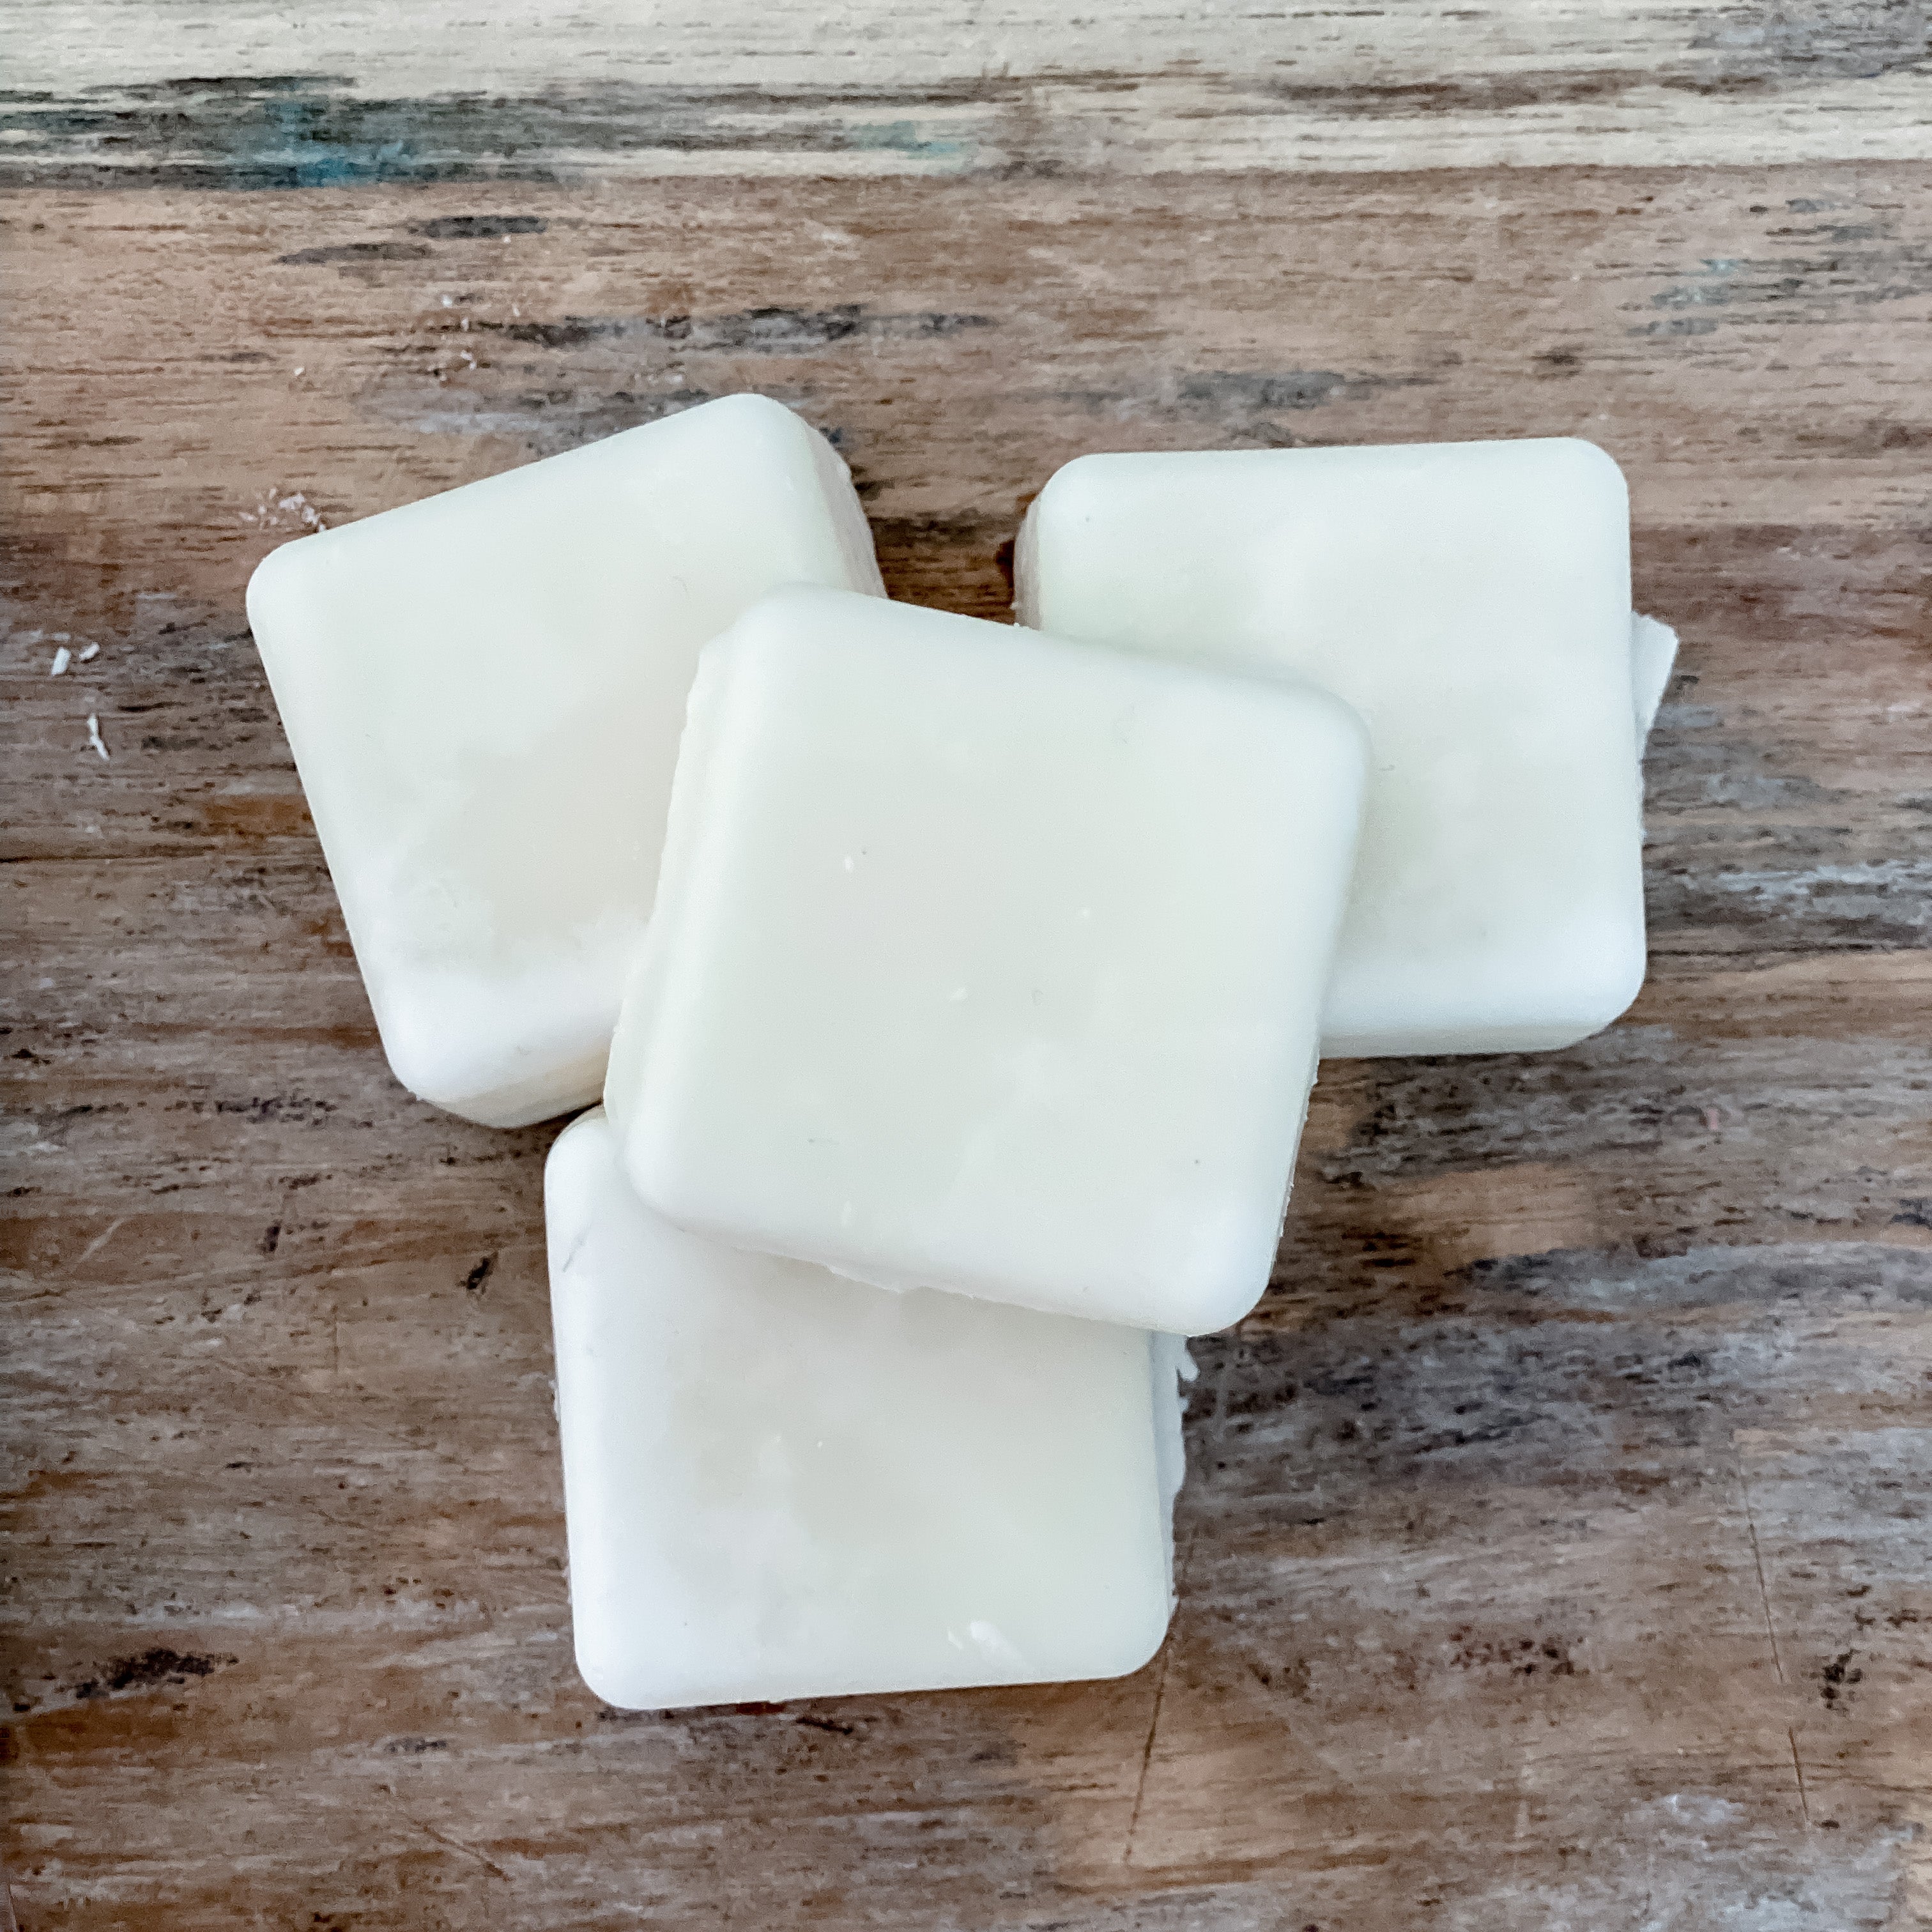 The Farmhouse Collection Wax Melts